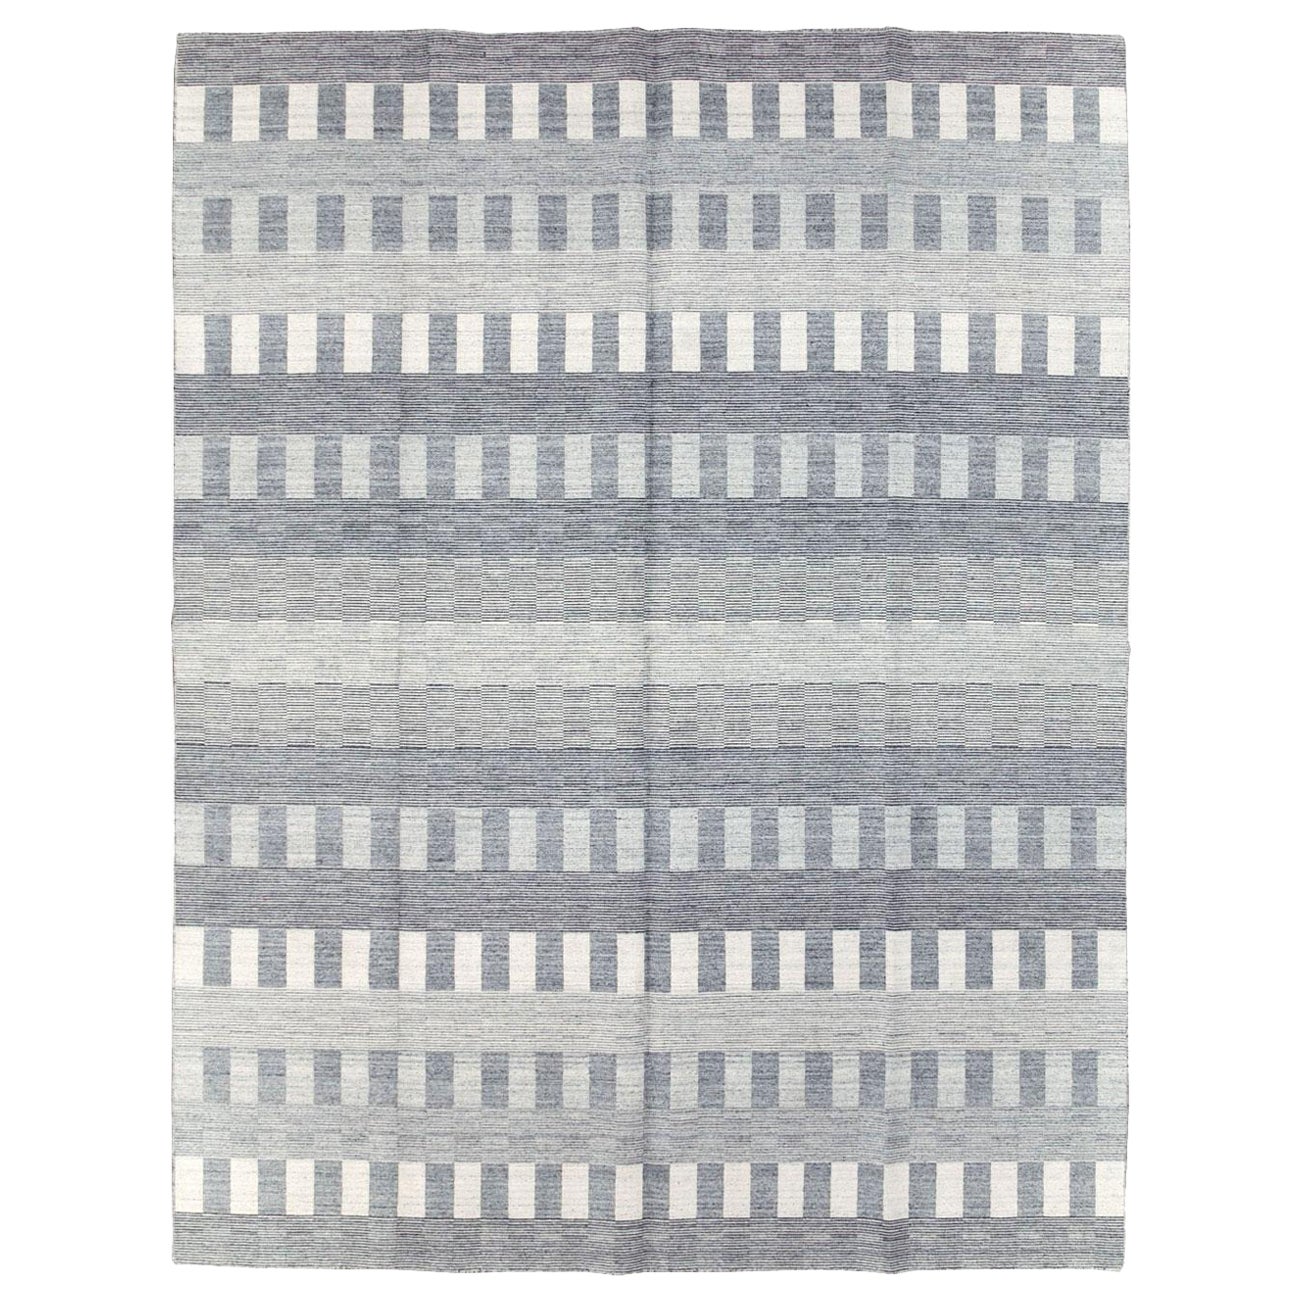 Galerie Shabab Collection Contemporary Turkish Flatweave Room Size Carpet For Sale